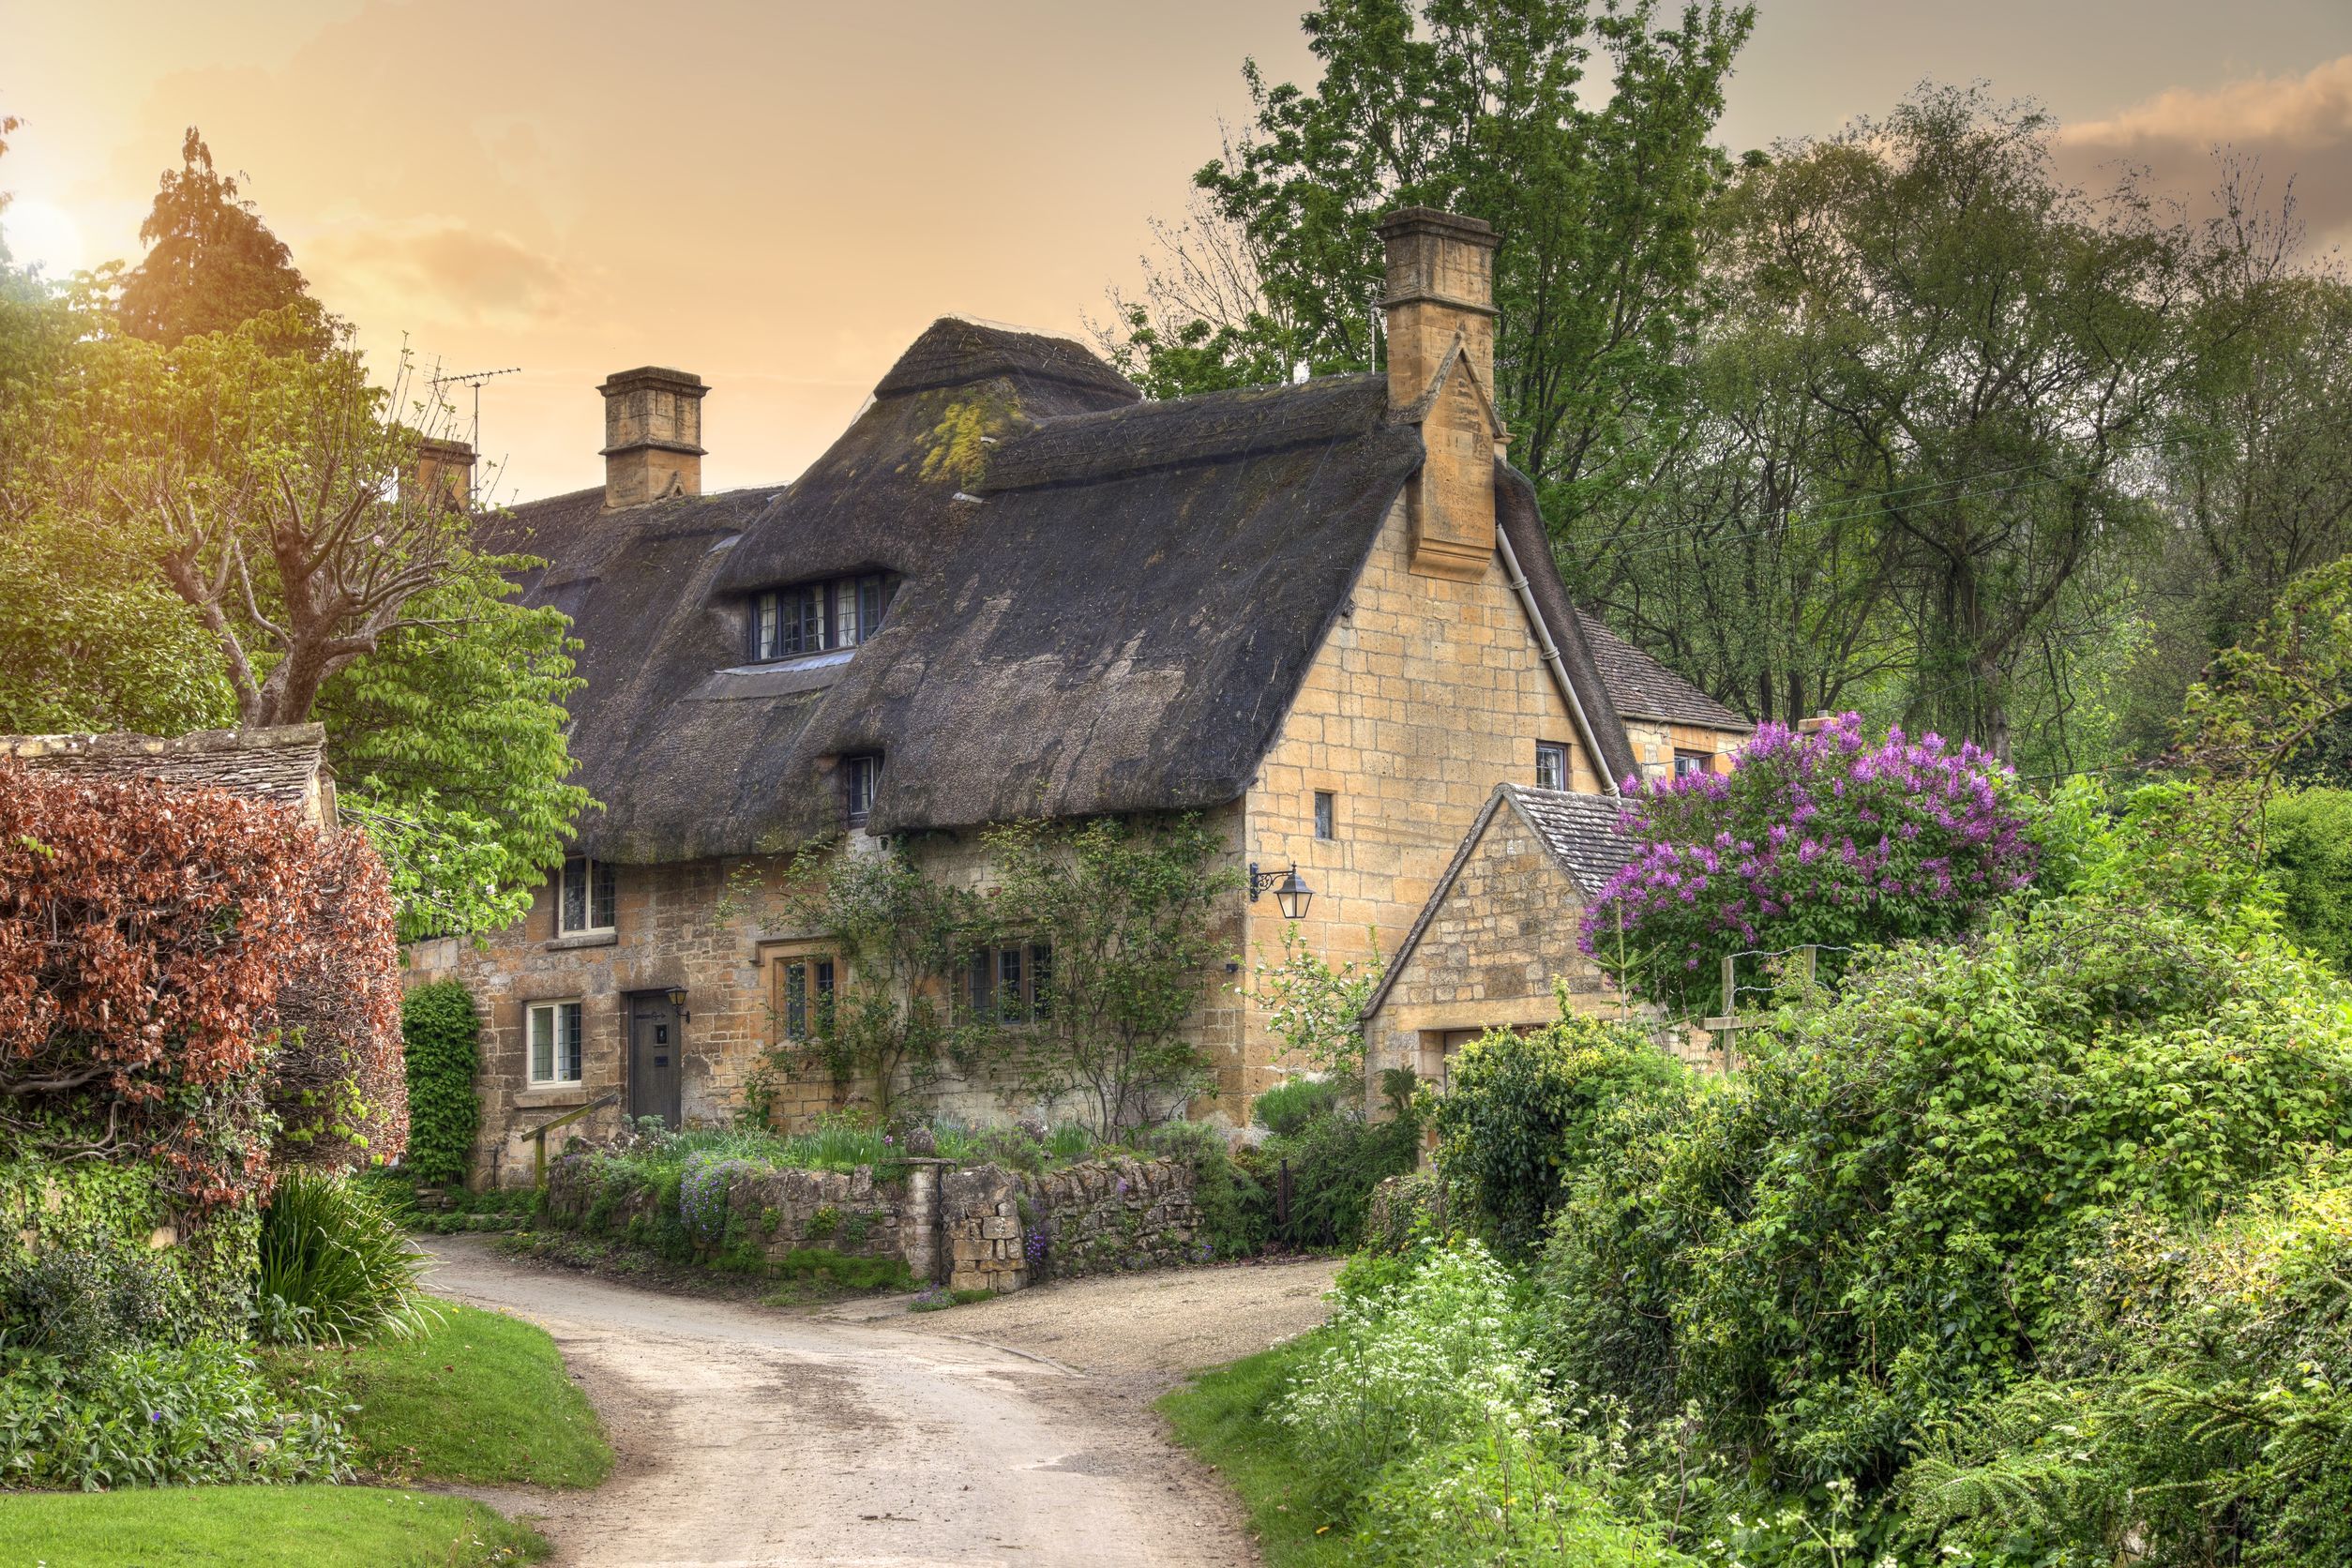 Pretty thatched Cotswold cottage in the village of Stanton, Gloucestershire, England.